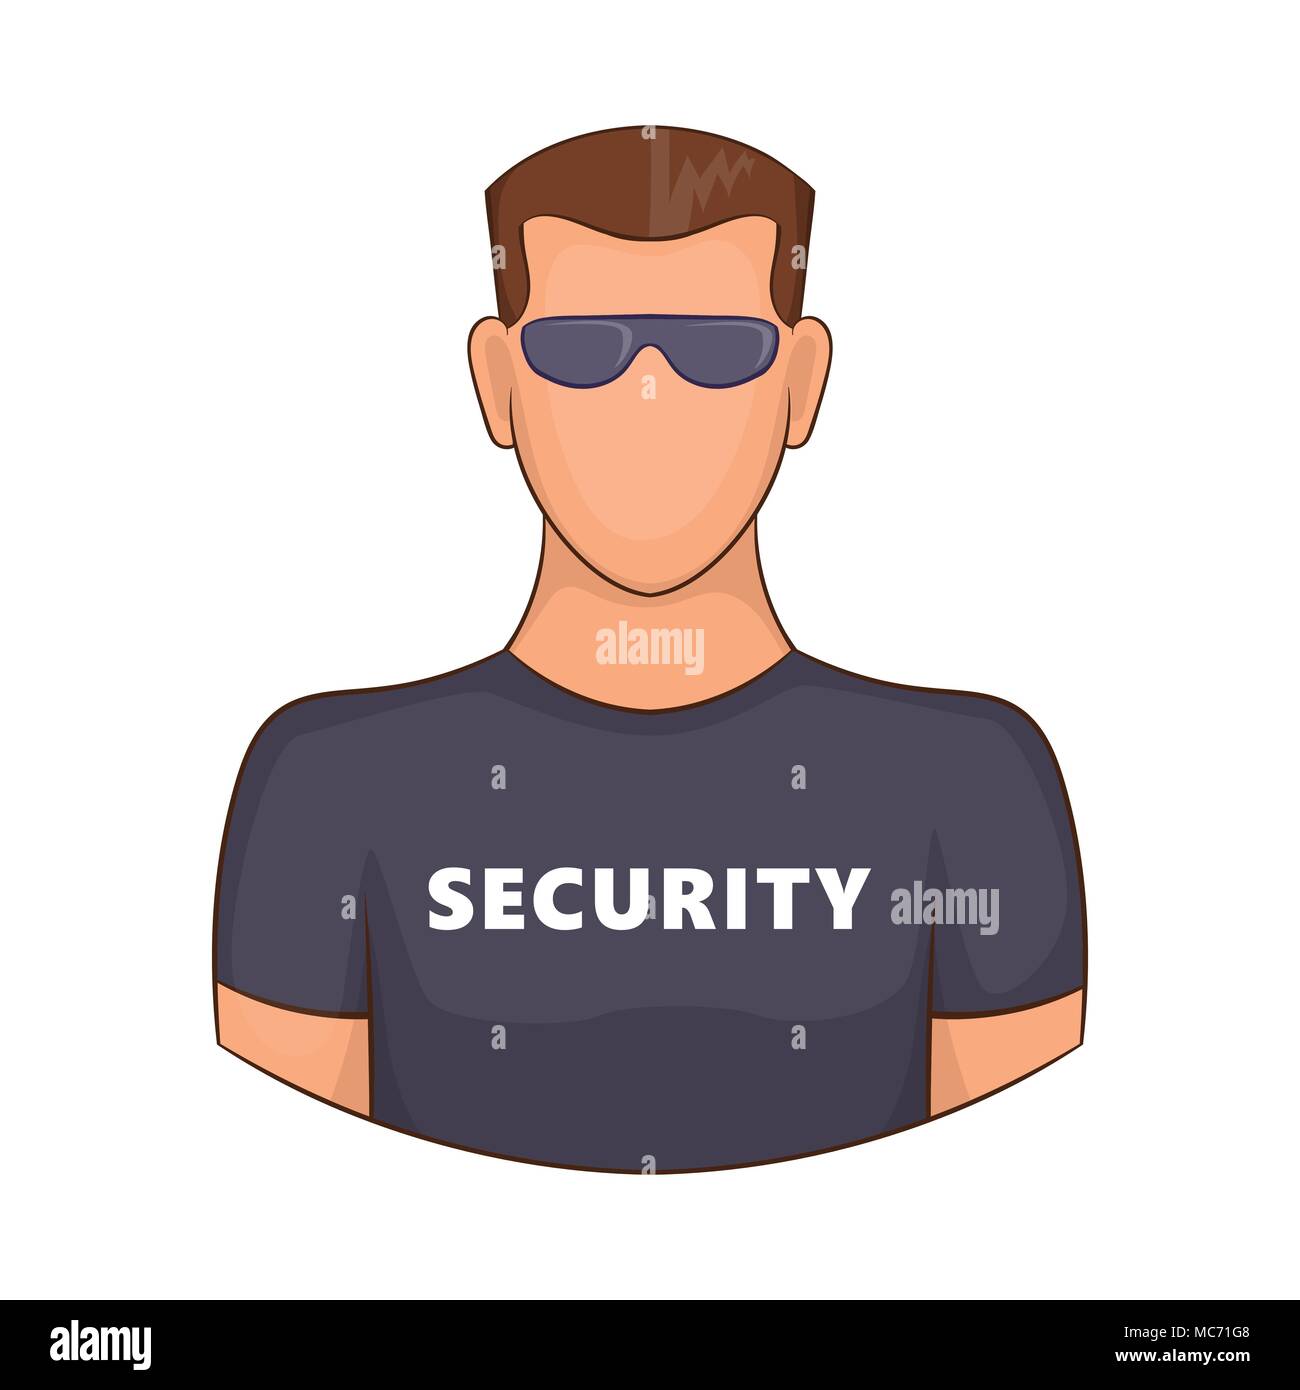 Cartoon Security Guard High Resolution Stock Photography and Images - Alamy